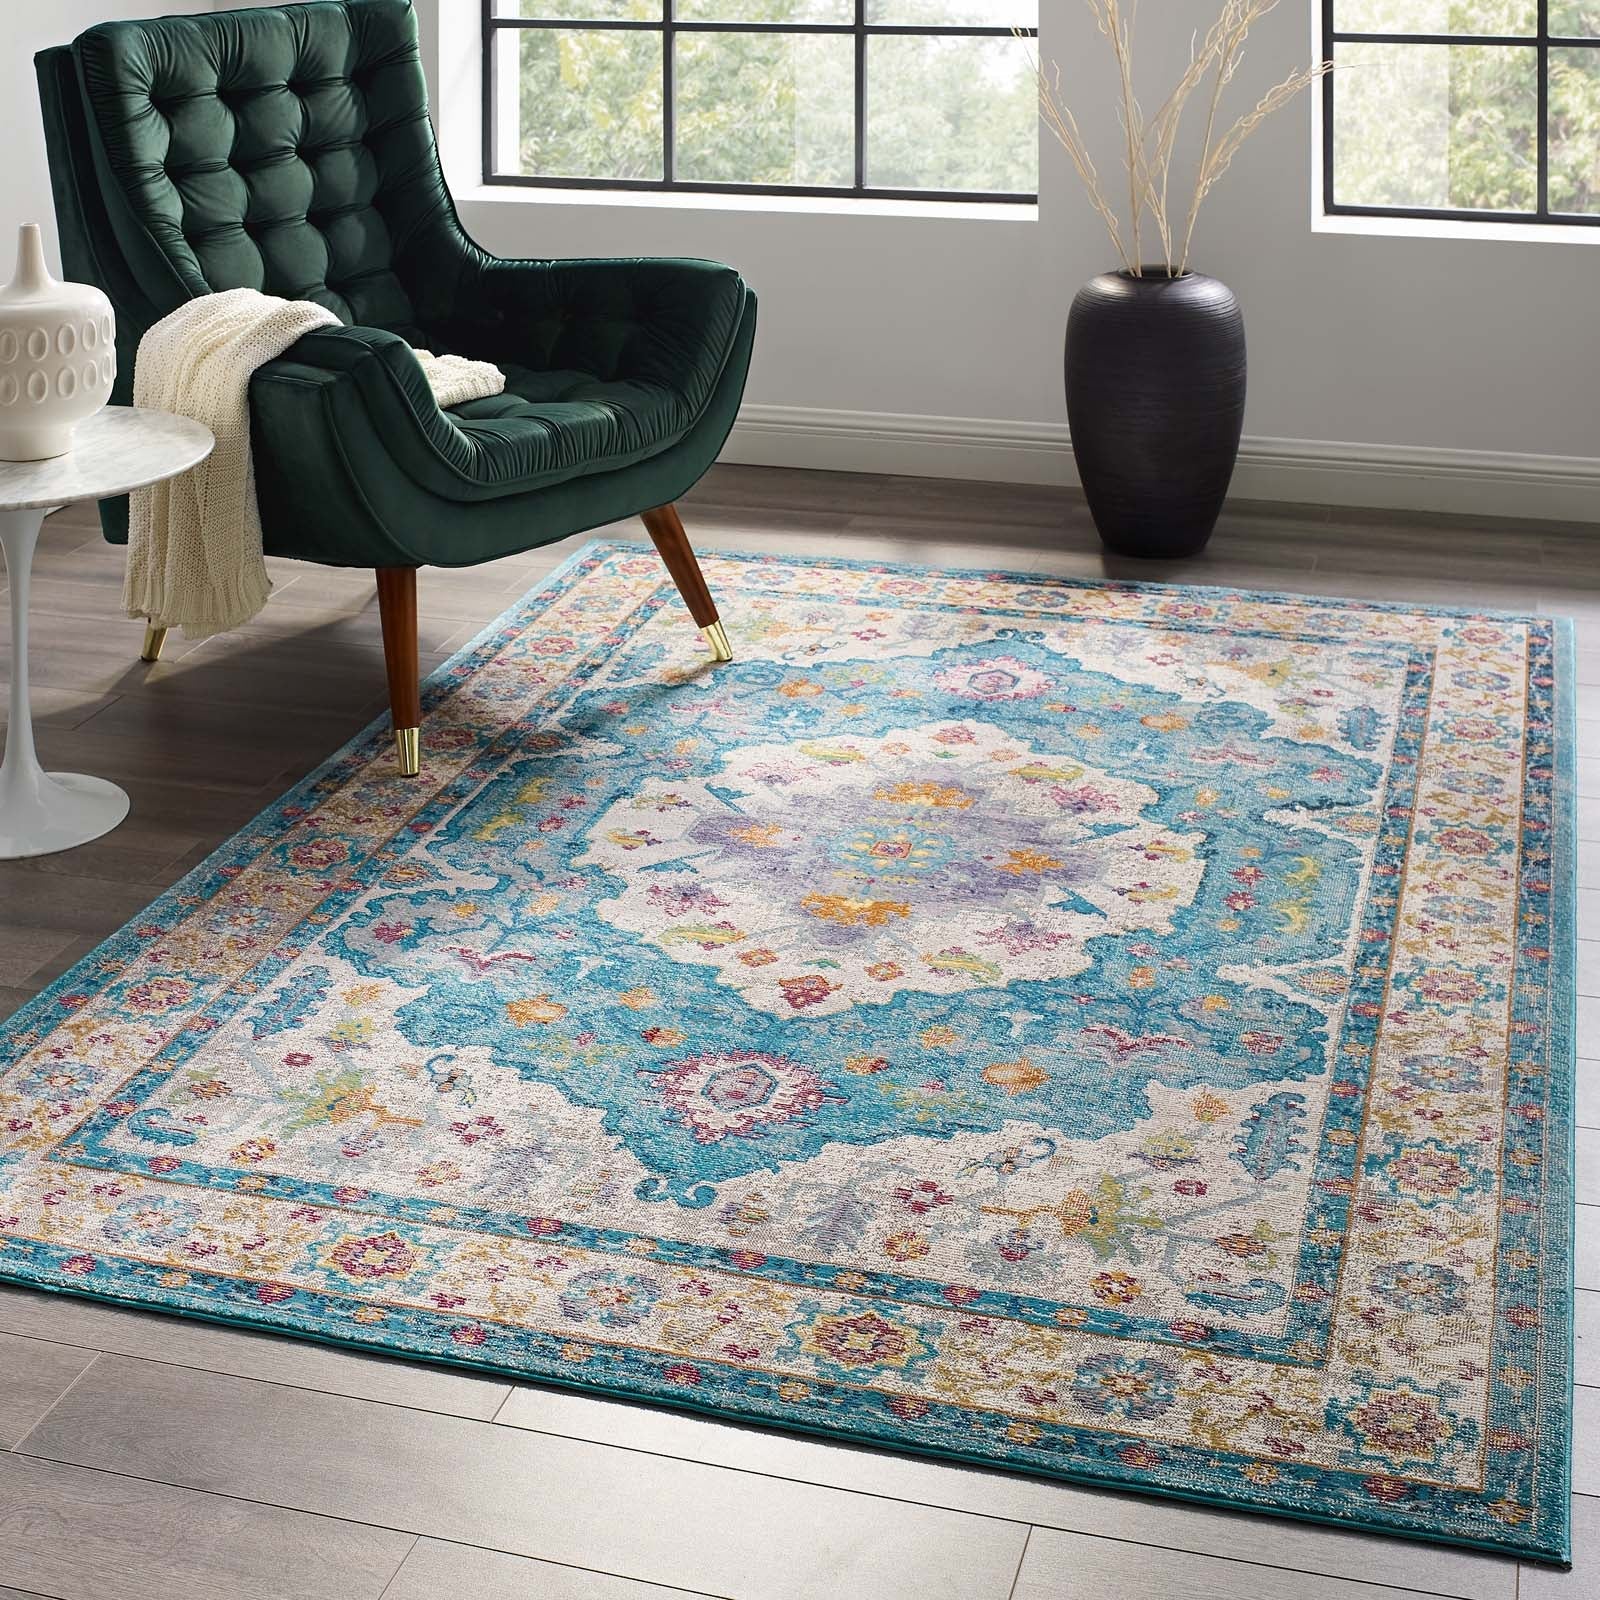 Success Anisah Distressed Floral Persian Medallion Area Rug